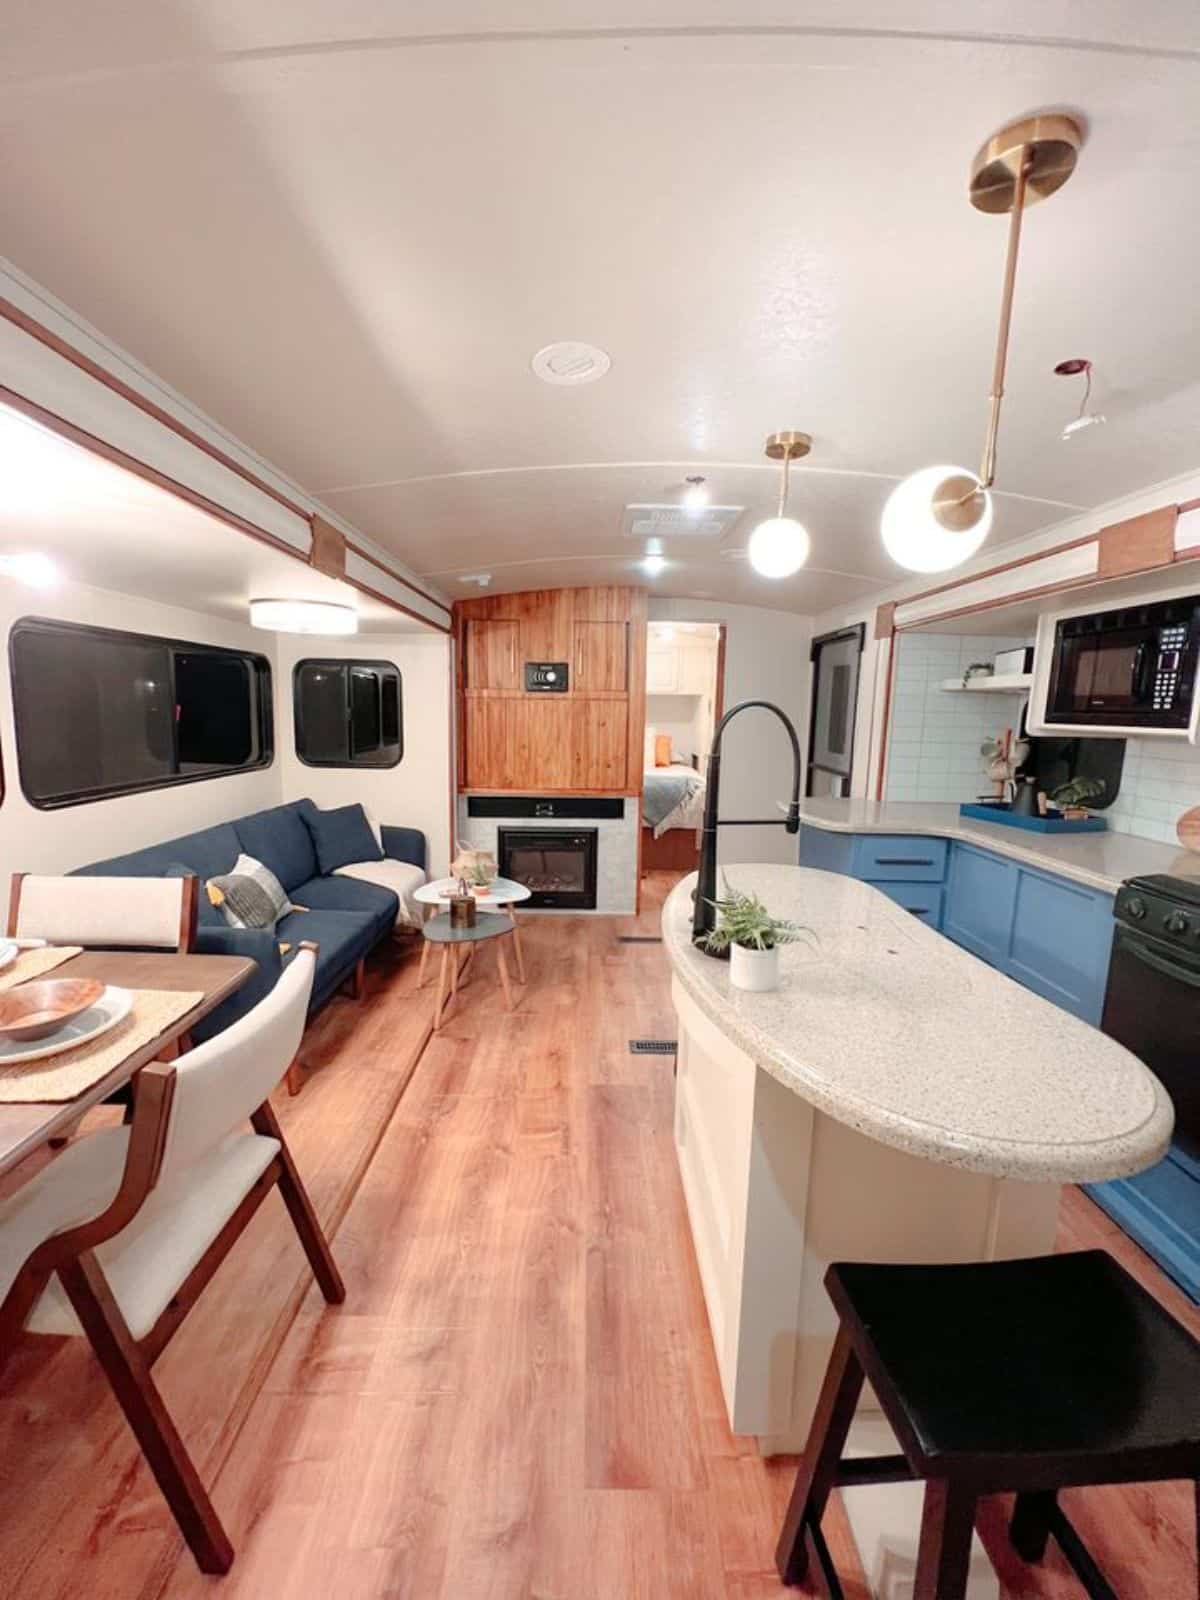 full length stunning interior view of redesigned tiny home